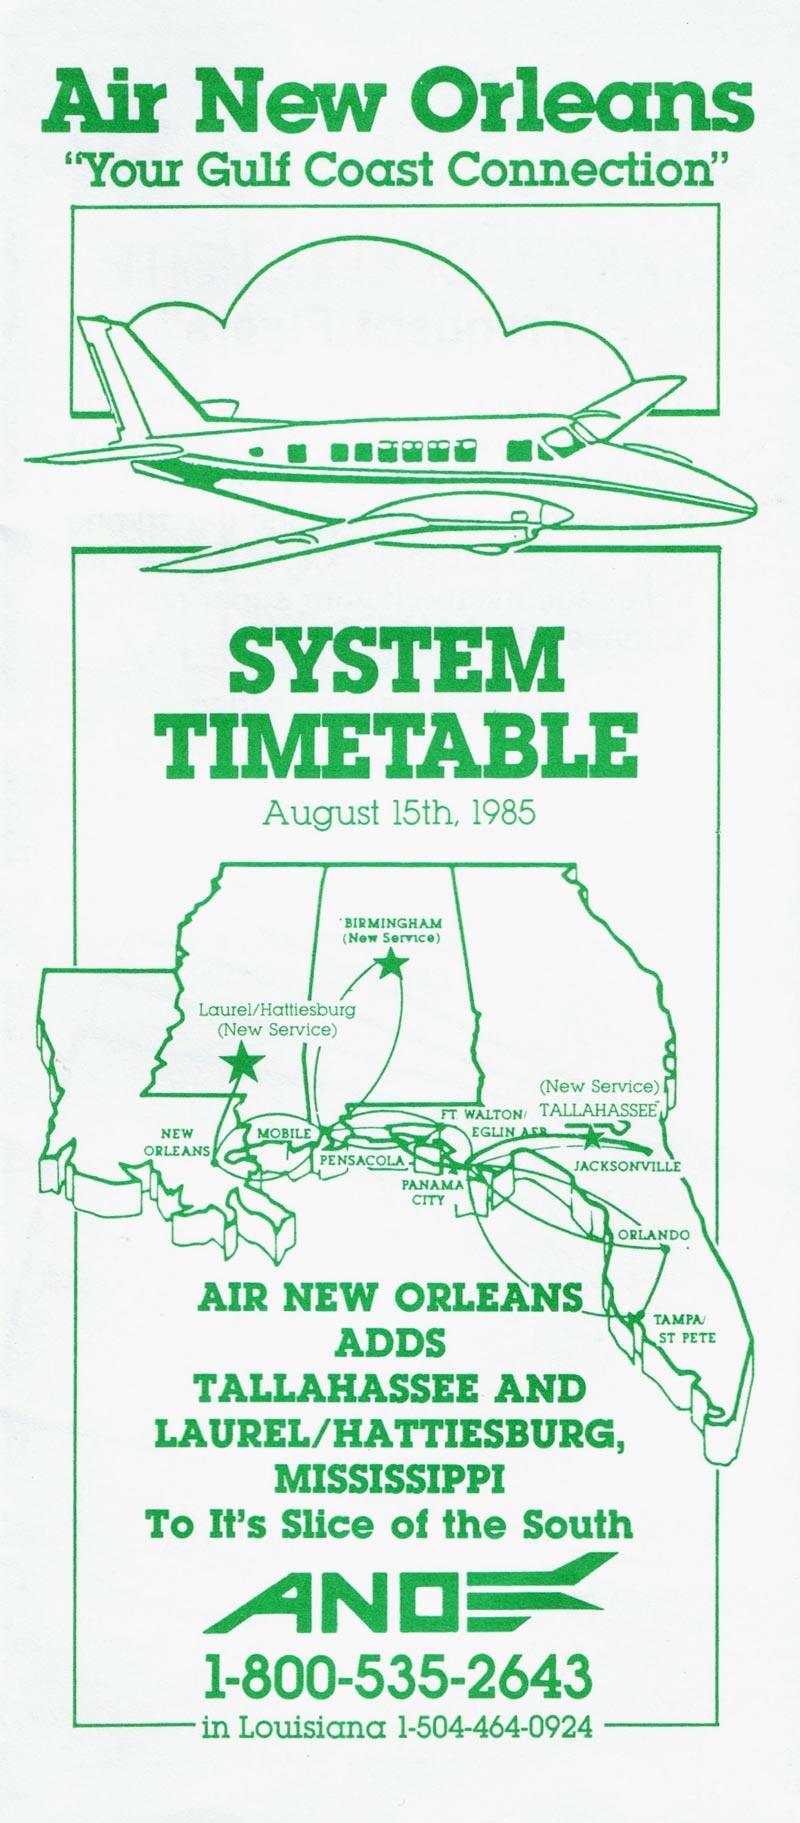 Air New Orleans timetable dated August 15, 1985 showing their extensive Gulf coast route system.